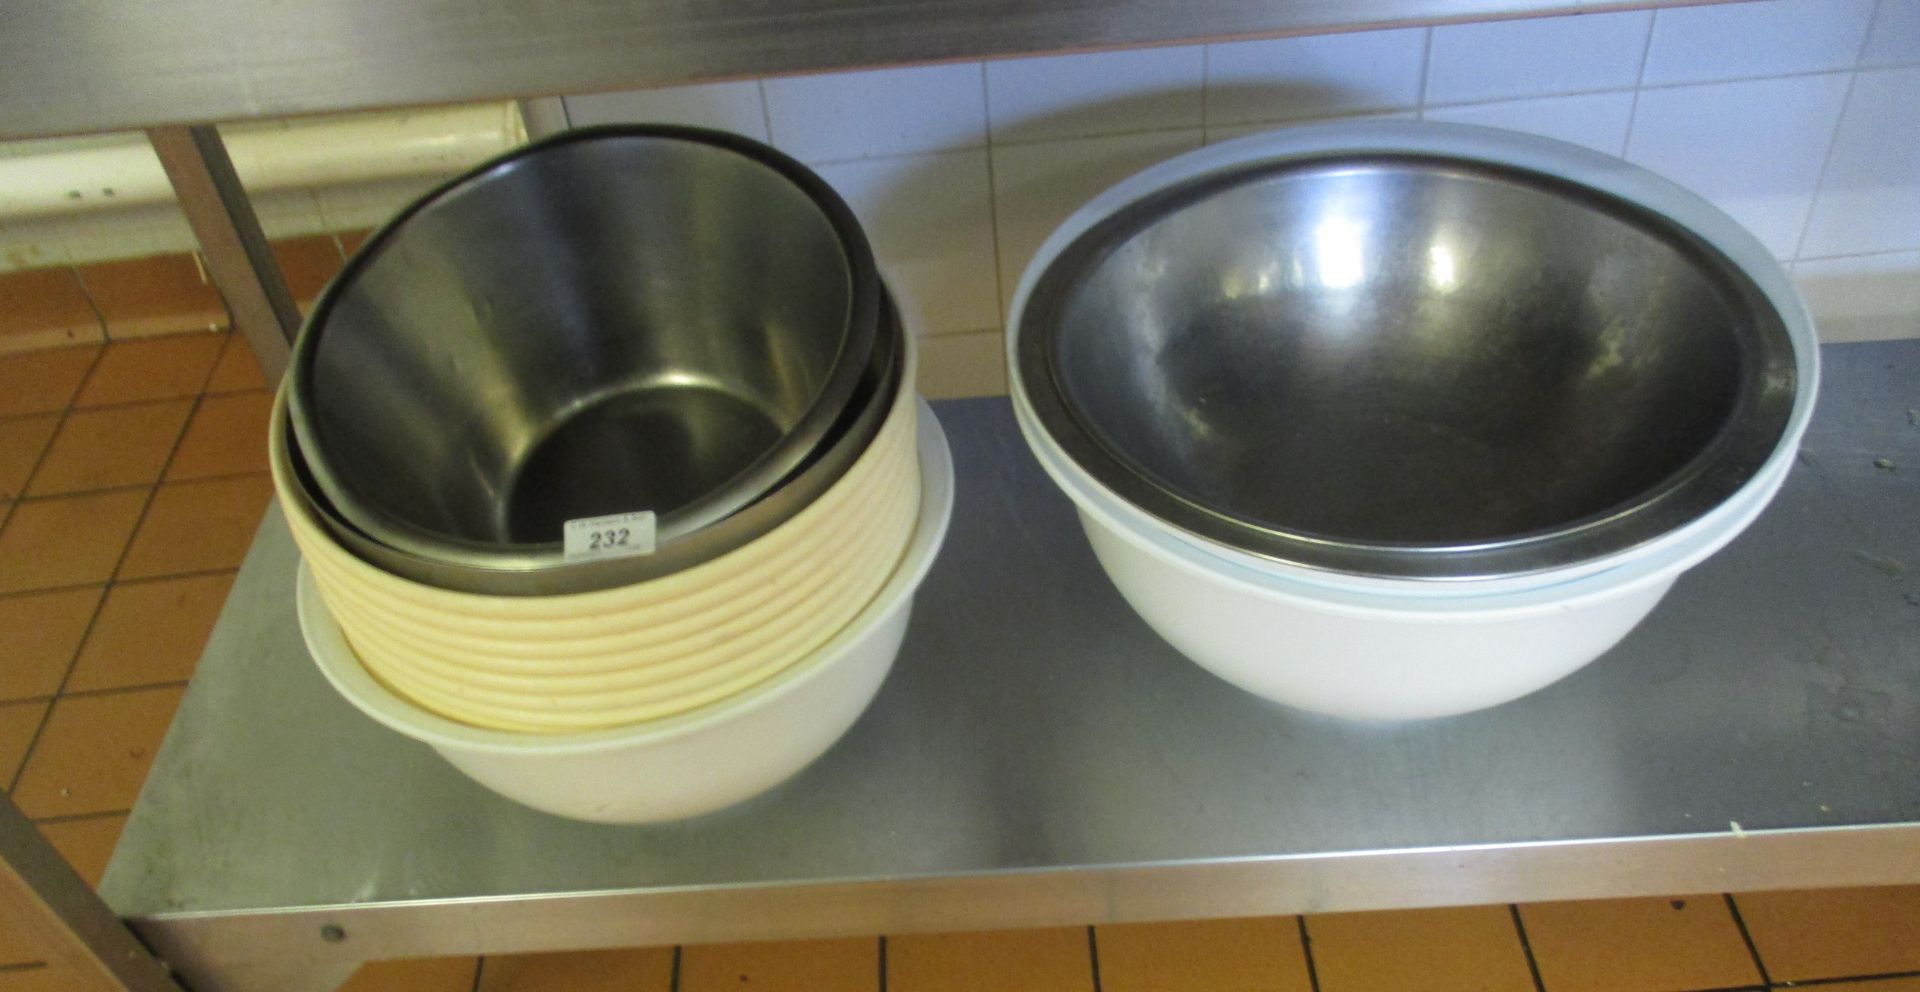 14 x stainless steel and other salad/mixing bowls.